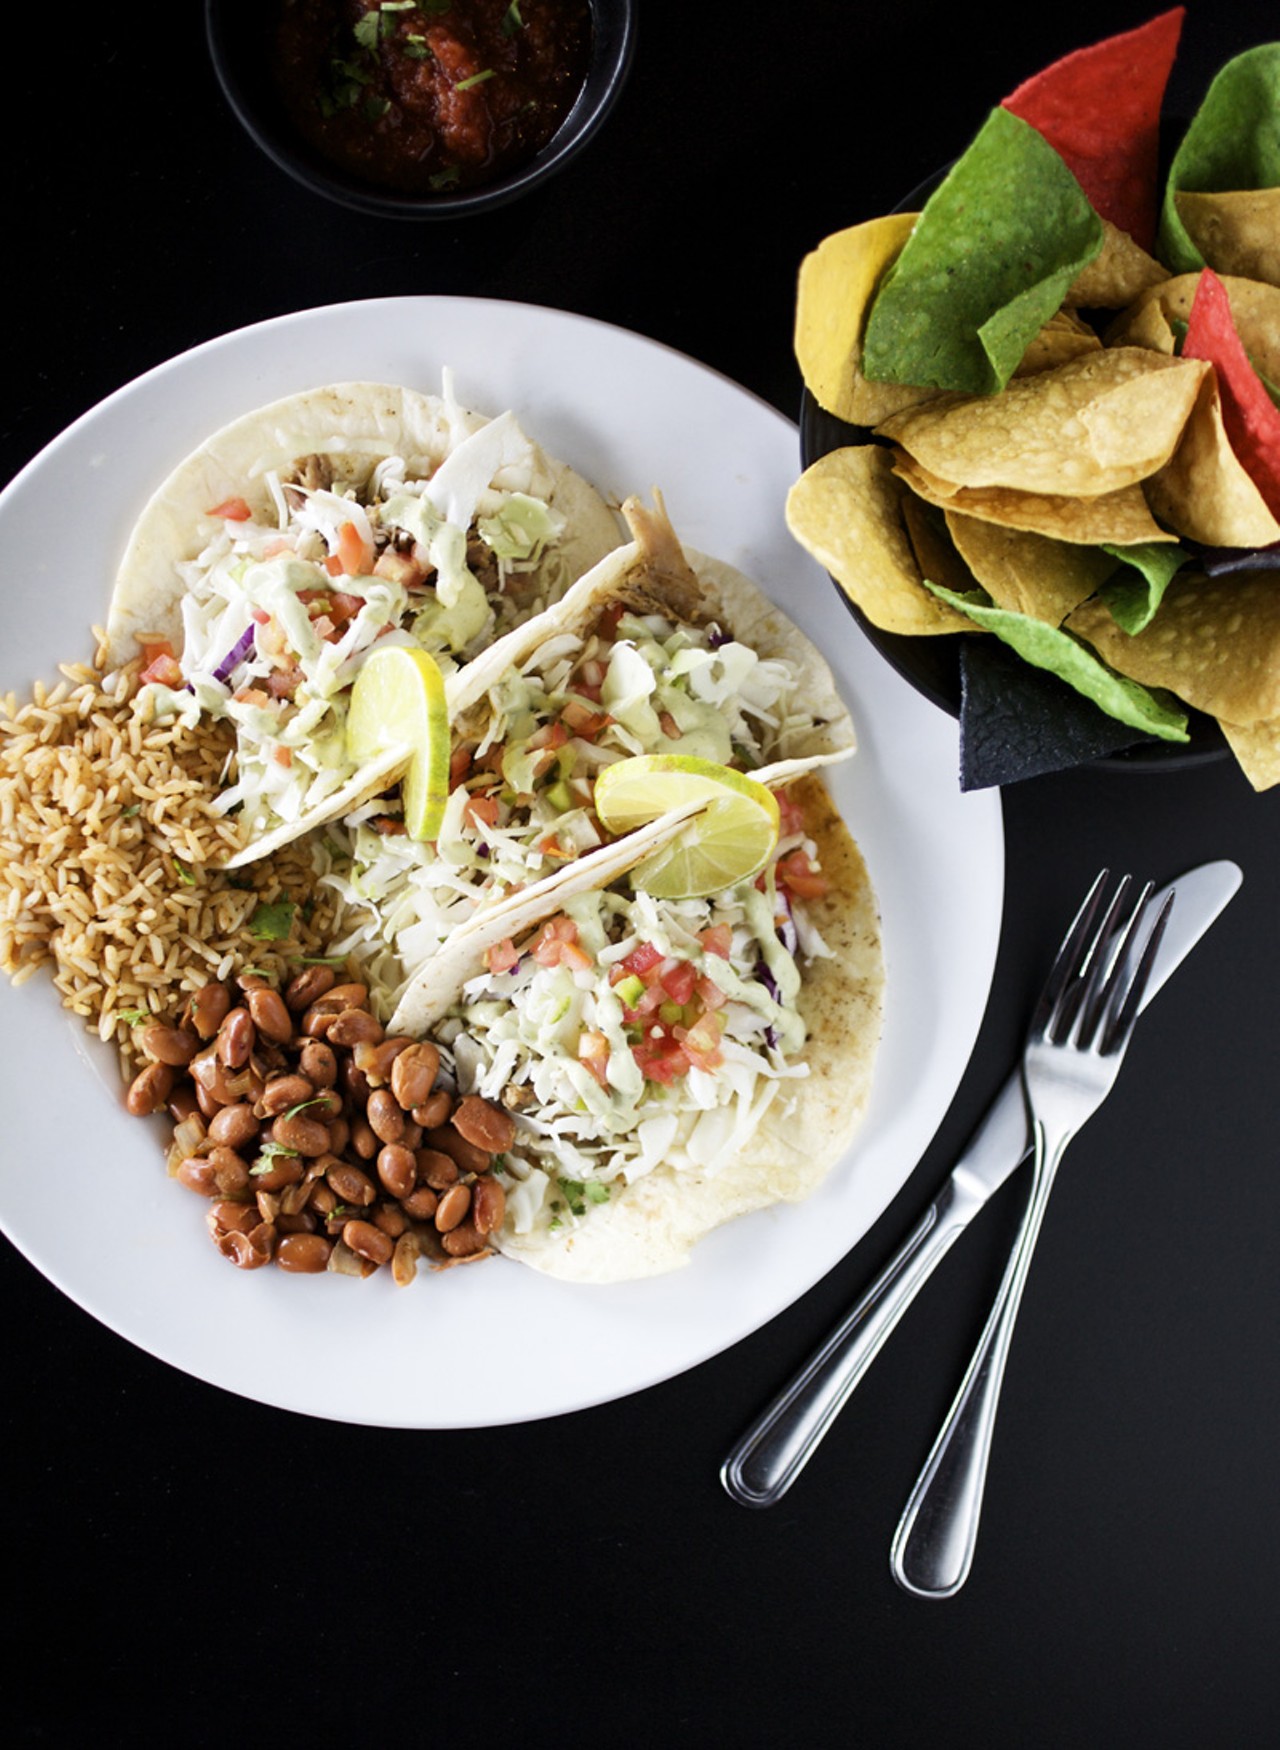 One of the house specialties listed on the menu is the fish, shrimp or crab cake soft tacos. They come served with Red's cheese blend, shredded cabbage, pico and cilantro lime cream.